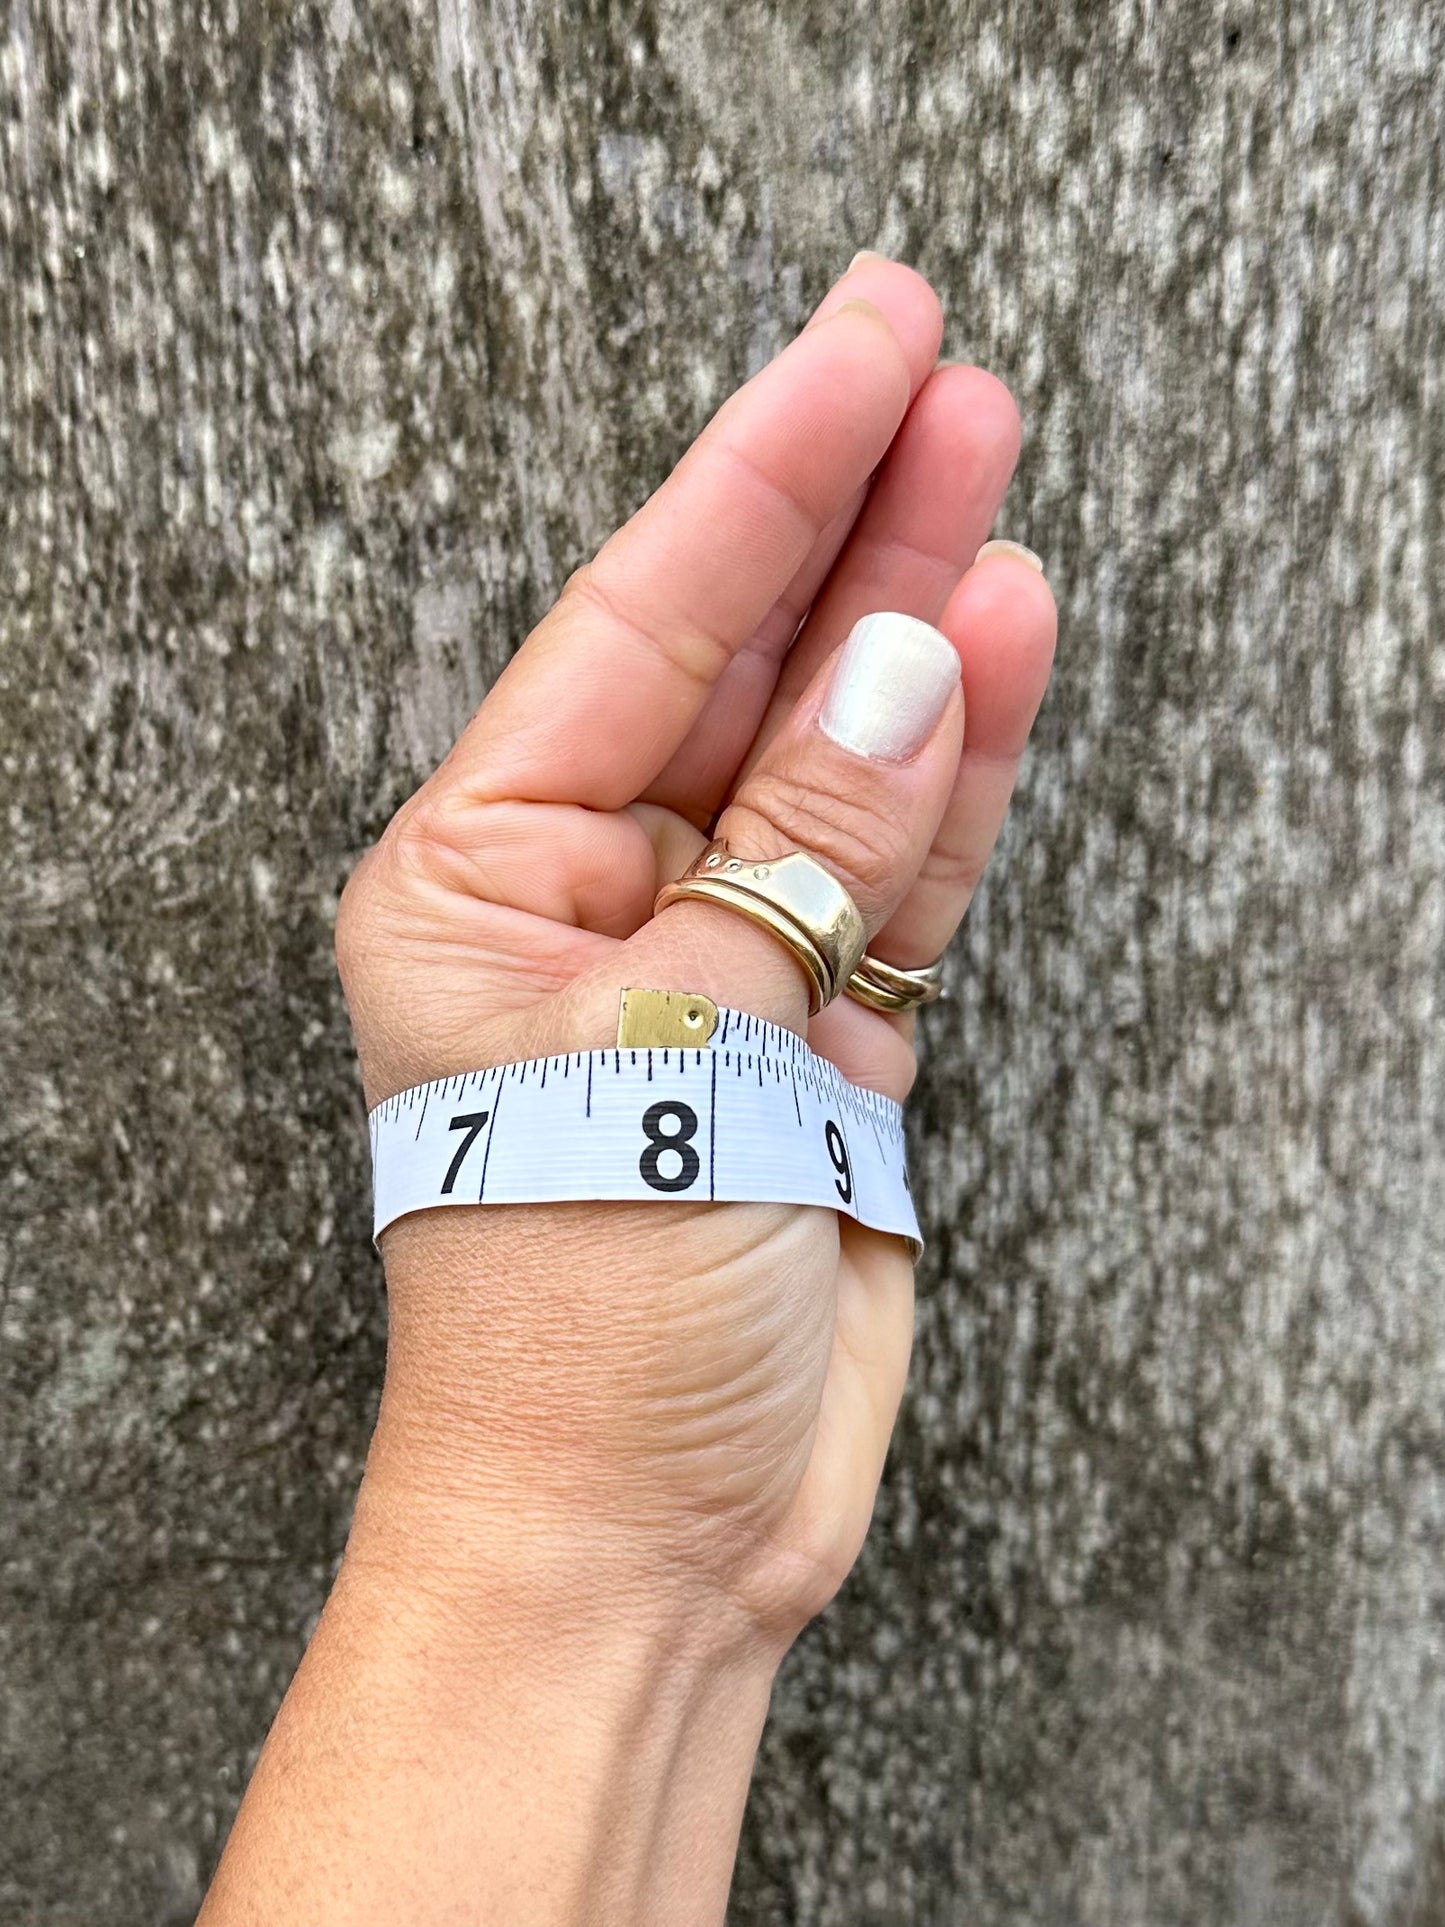 A woman's hand with thumb and pinky touching with a measuring tape wrapped around her palm showing a measurement held up against a wooden back ground.